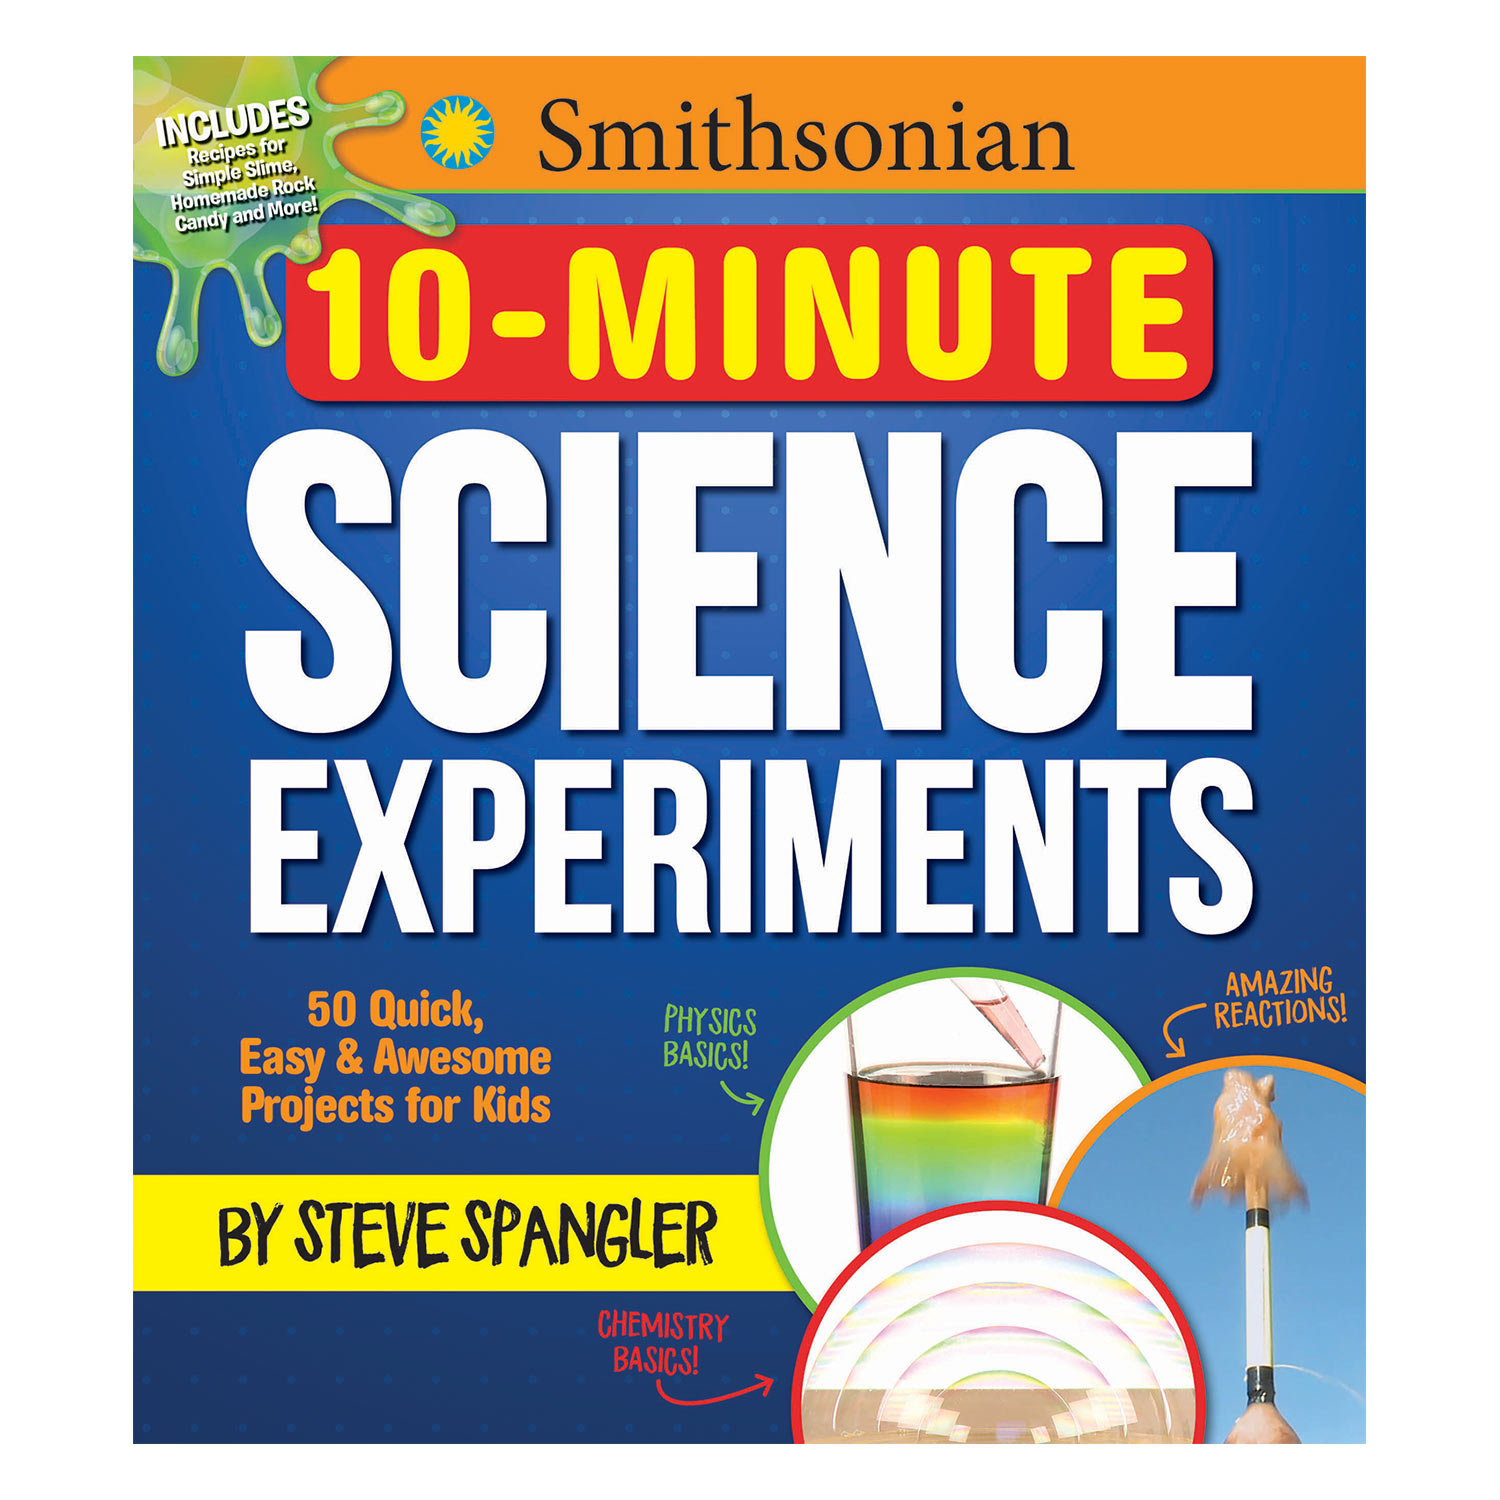 Smithsonian 10-Minute Science Experiments